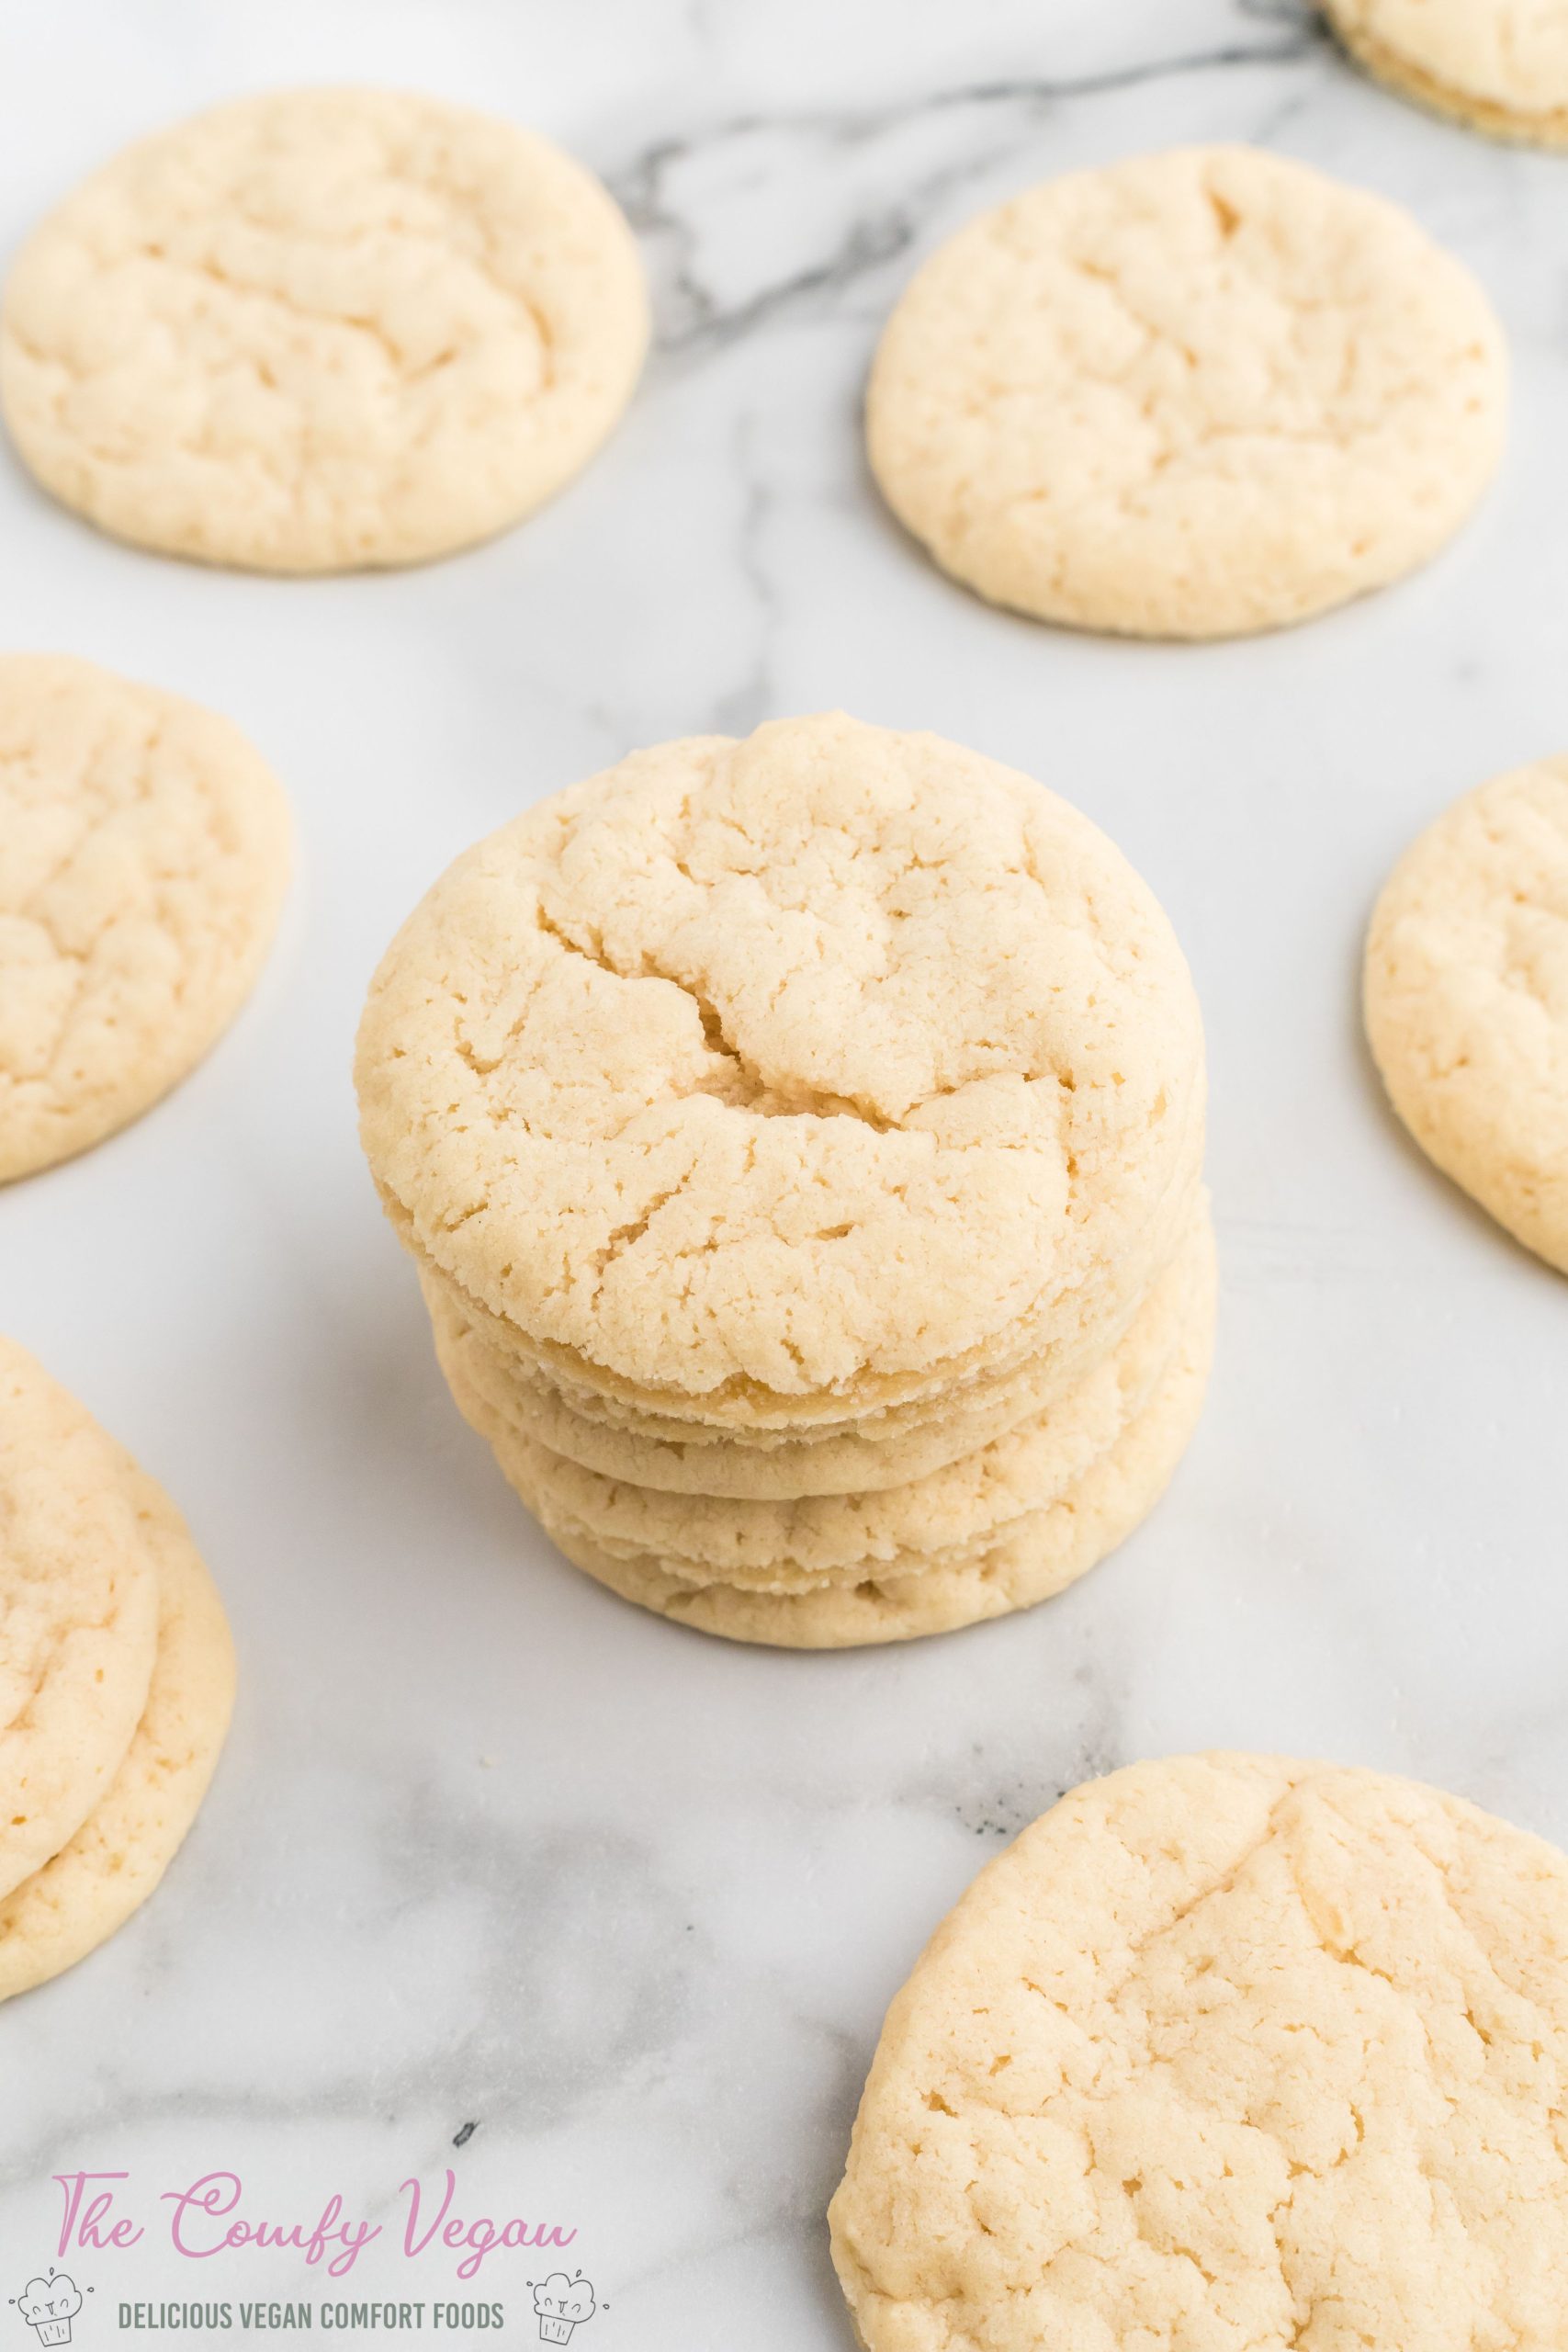 Enjoy these delicious Vegan Sugar Cookies. They're an easy one-bowl recipe that is ready to enjoy in under 30 minutes. Loved by all, these cookies are soft on the inside and slightly crispy on the edges. Top with some quick icing to take these cookies to the next level.